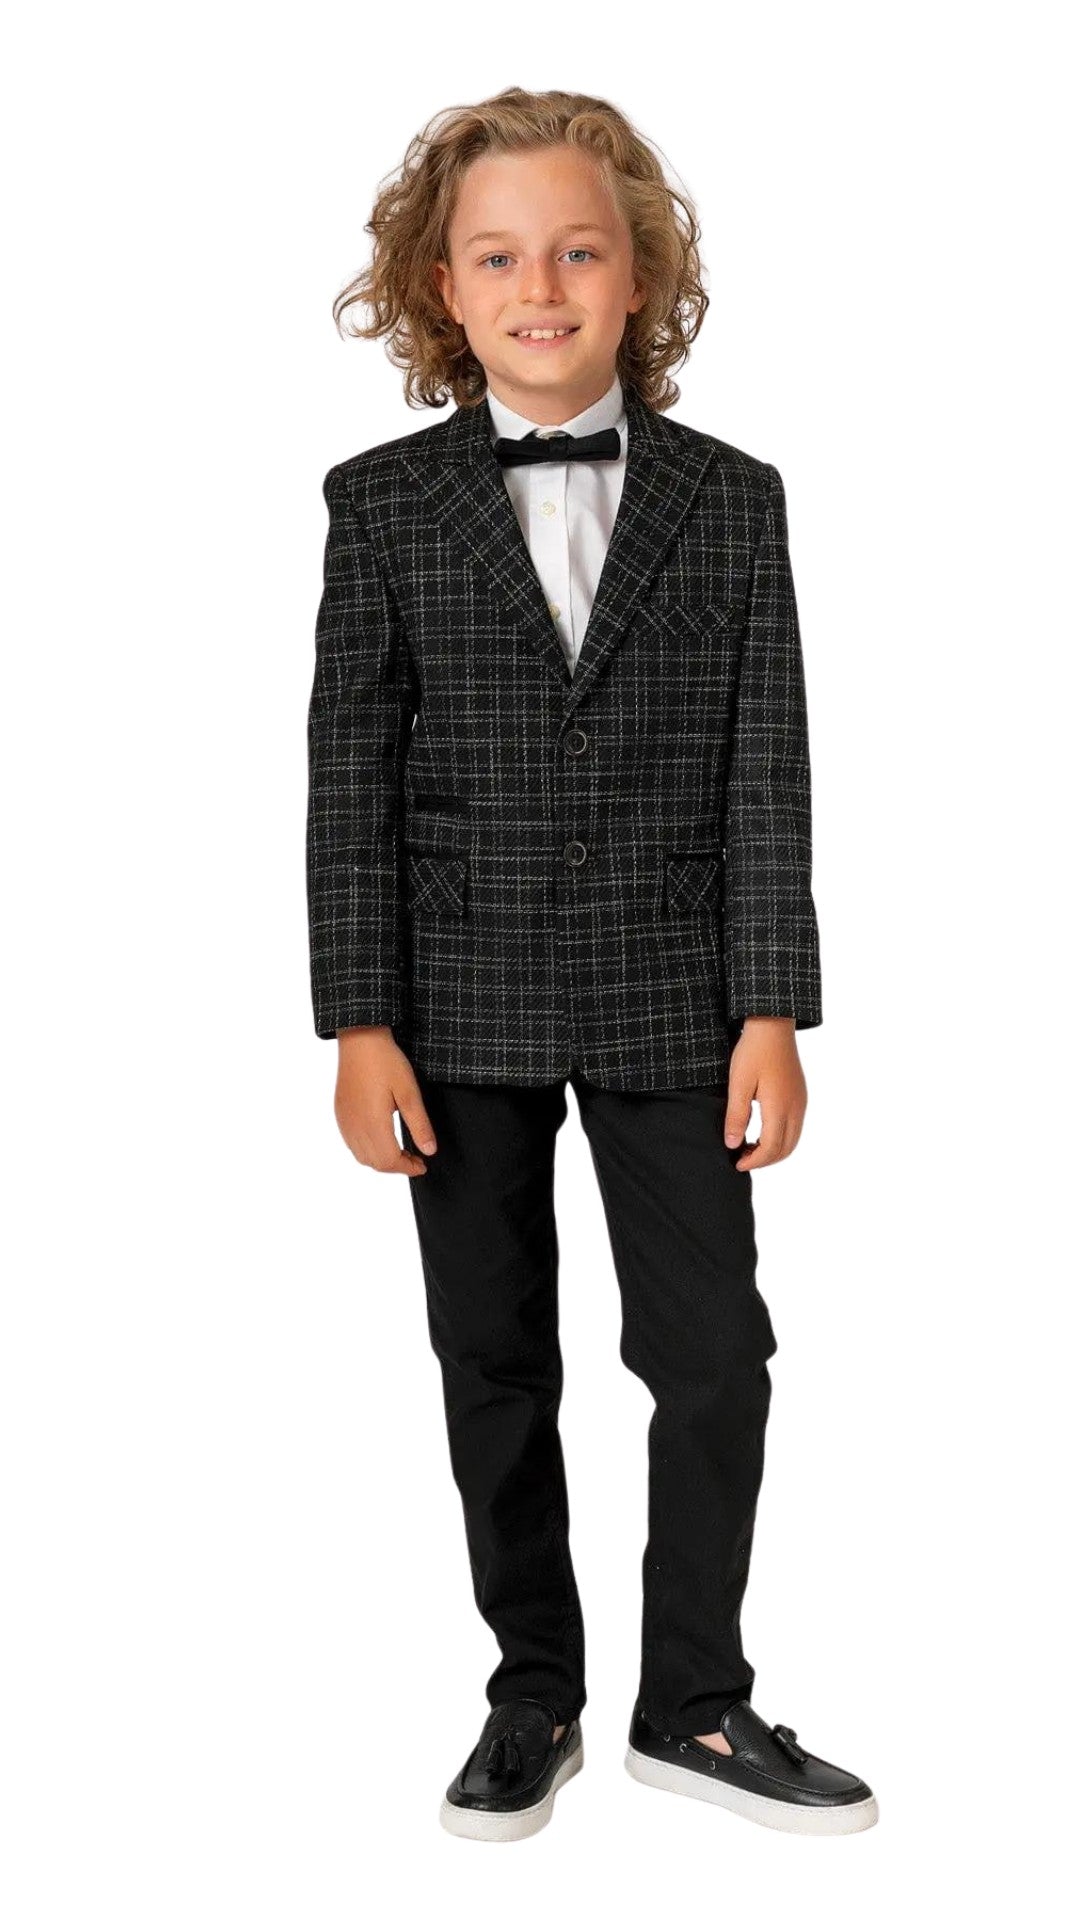 Green boys suits for formal special events. Boys size 0-8.